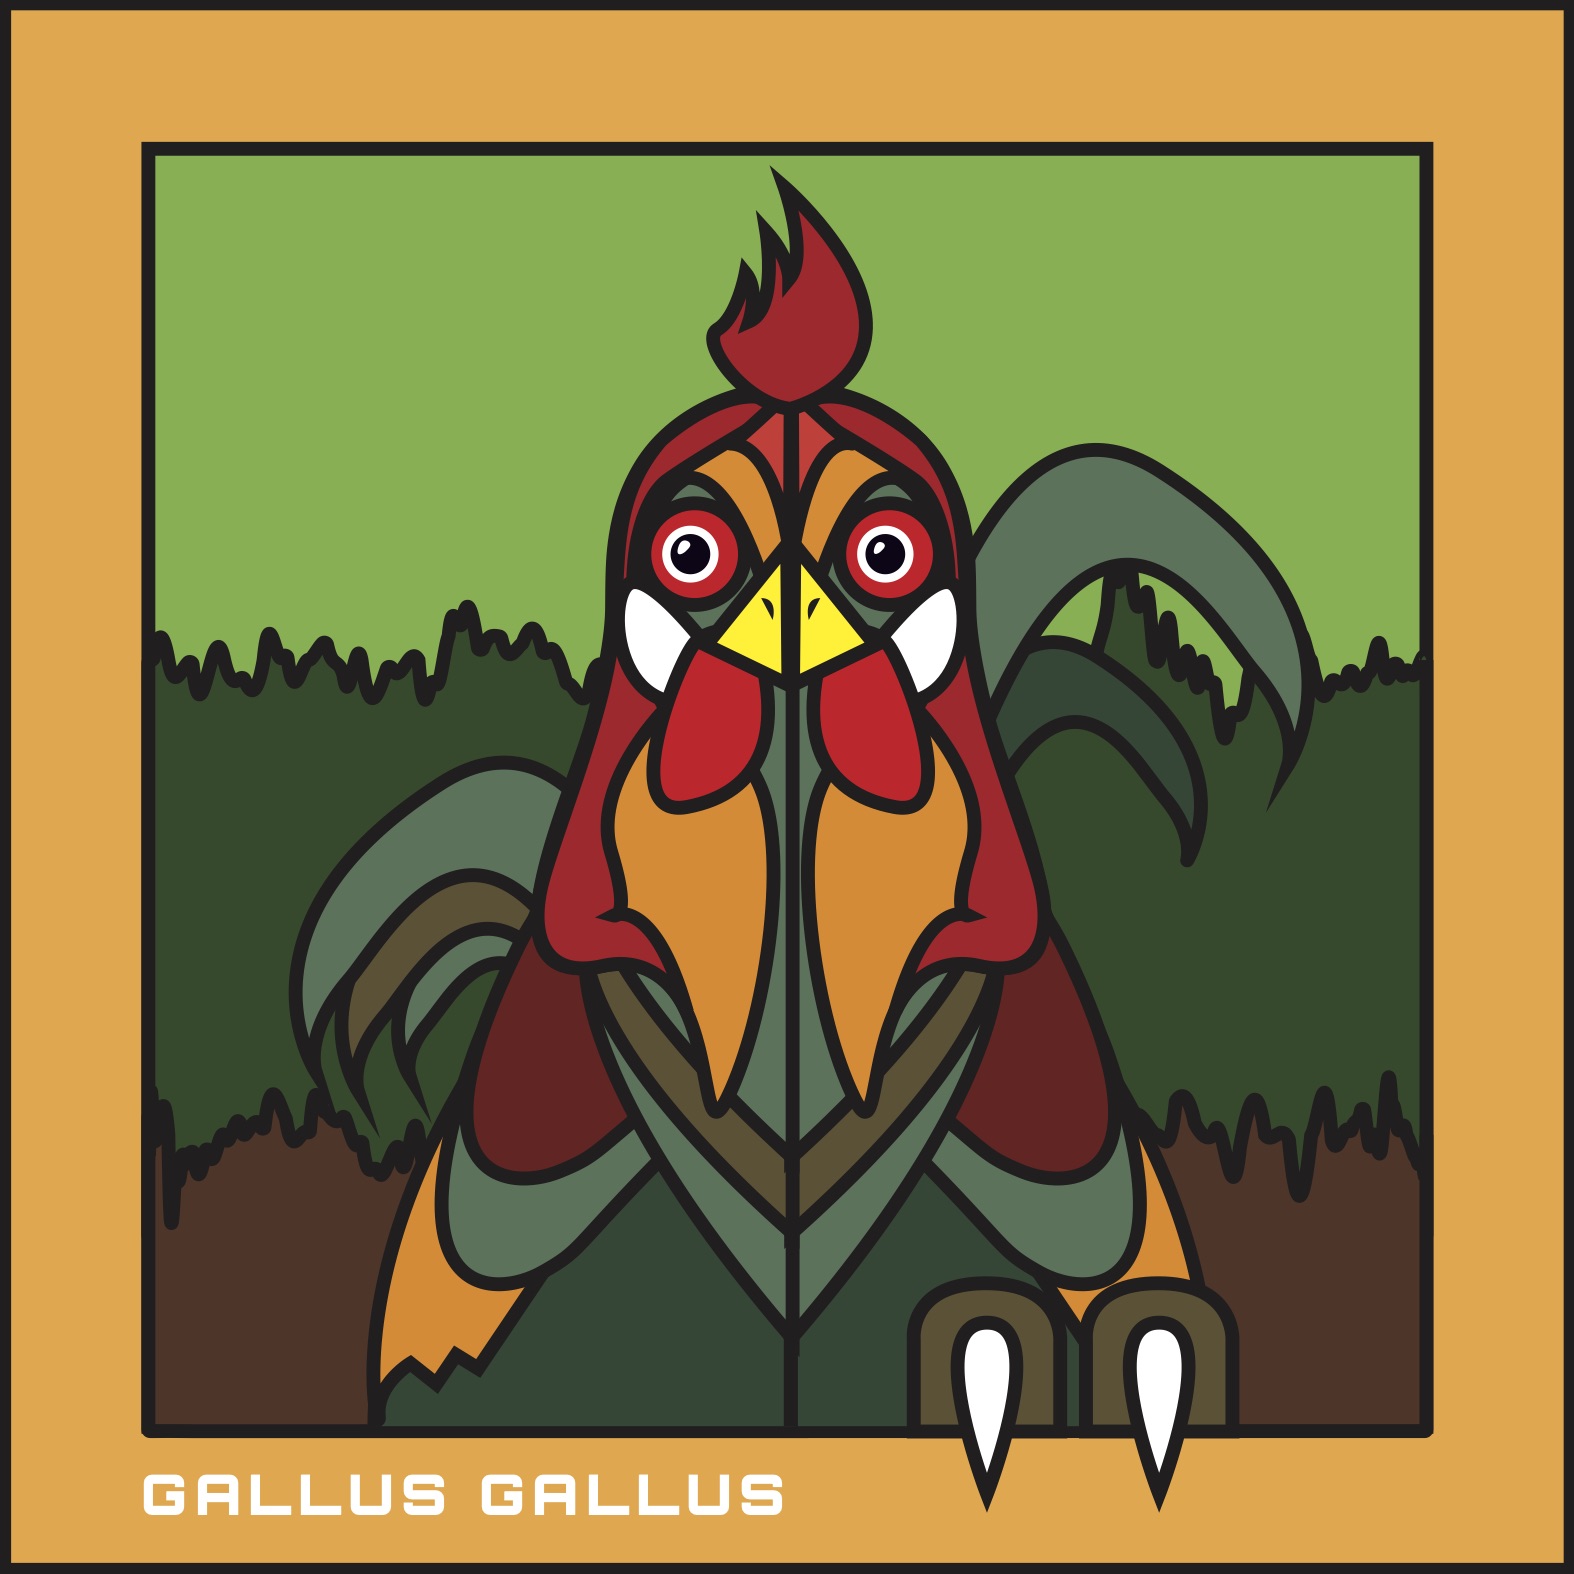 Gallus Gallus or The Sin Ming Chickens